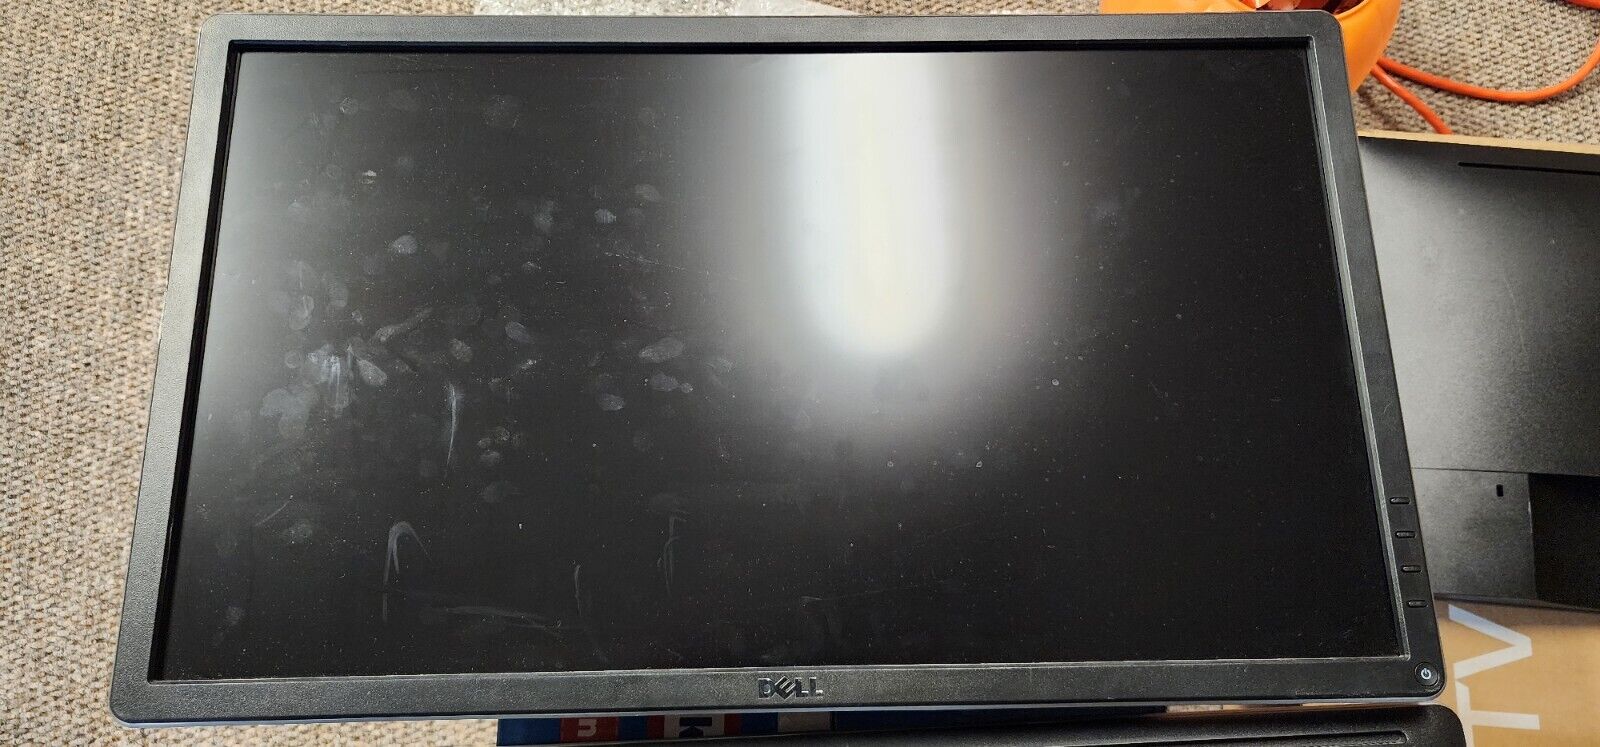 Dell P2416D LCD Monitor